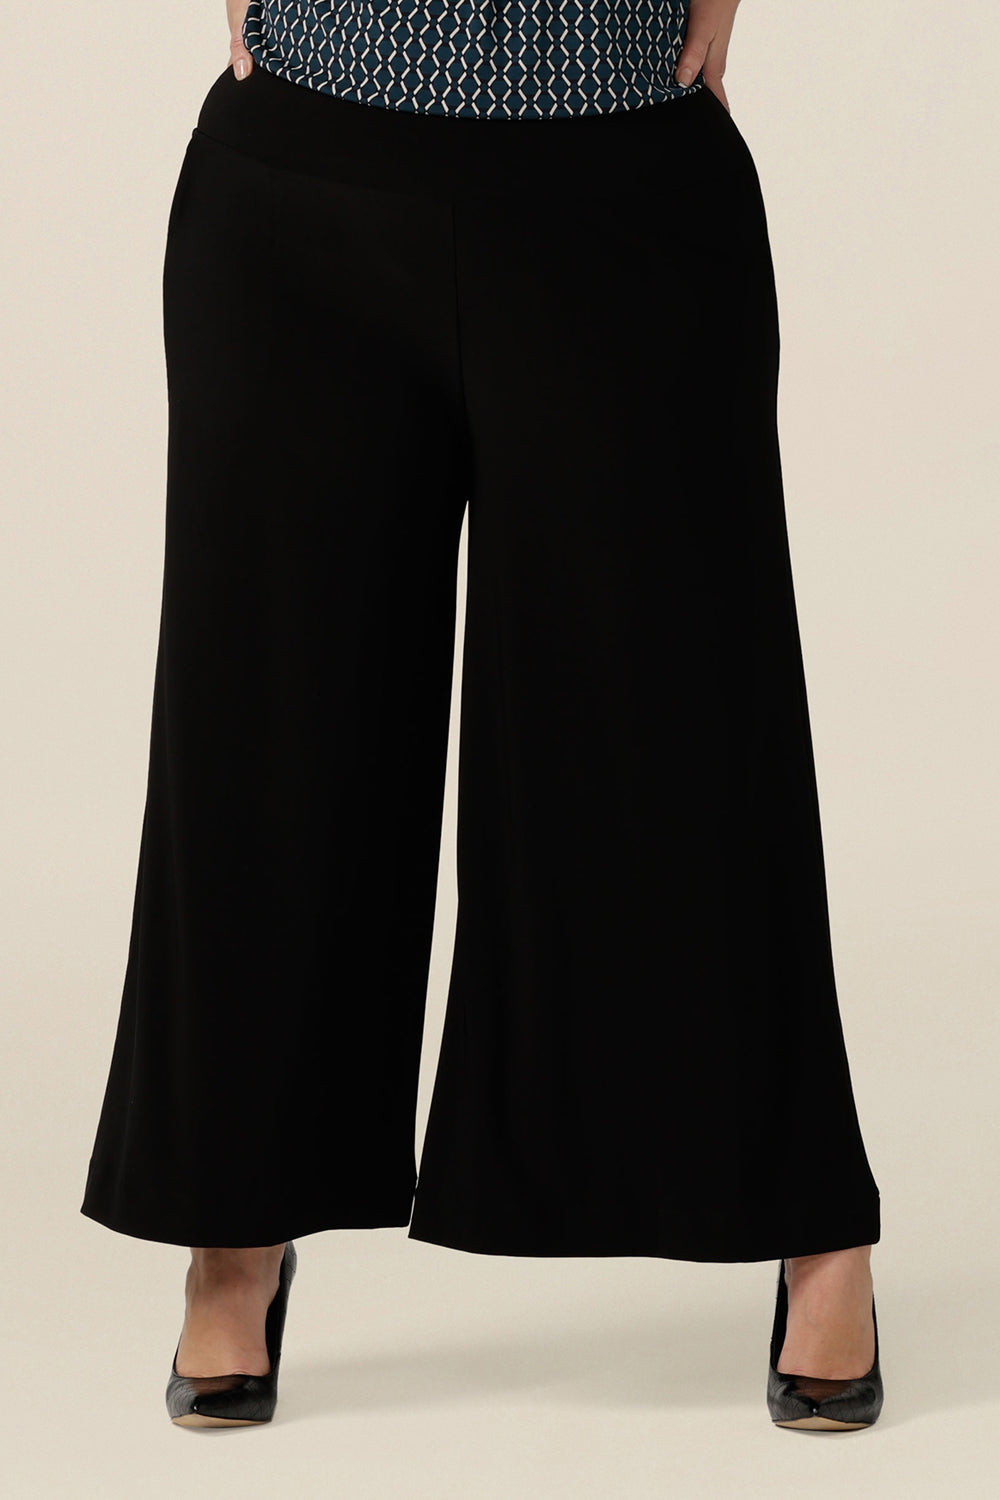 Comfortable, black wide leg pants with pockets are shown in a size 18. These pull-on, easy care pants are comfortable for your everyday workwear capsule wardrobe. Shop these black pants online in sizes 8 to 24, petite to plus sizes.